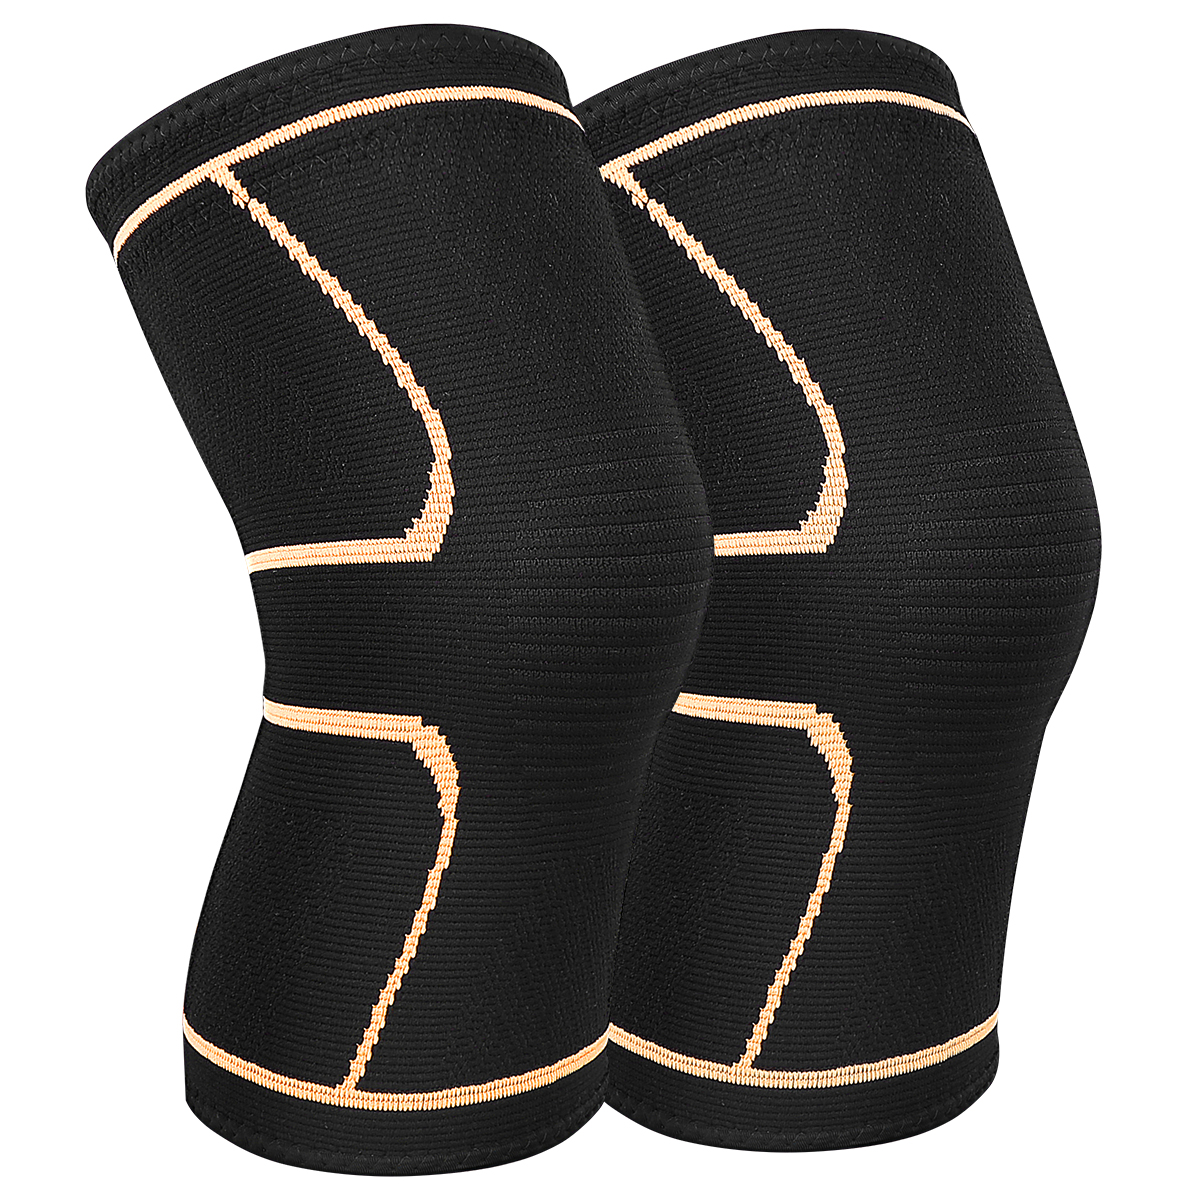 Knee Brace Support Pair for Men Women, AVIDDA Copper Compression Knee Sleeve for Joint Pain Relief, Arthritis, Meniscus Tear, Injury Recovery, Running, Squats, Weight Lifting, Football Gold M